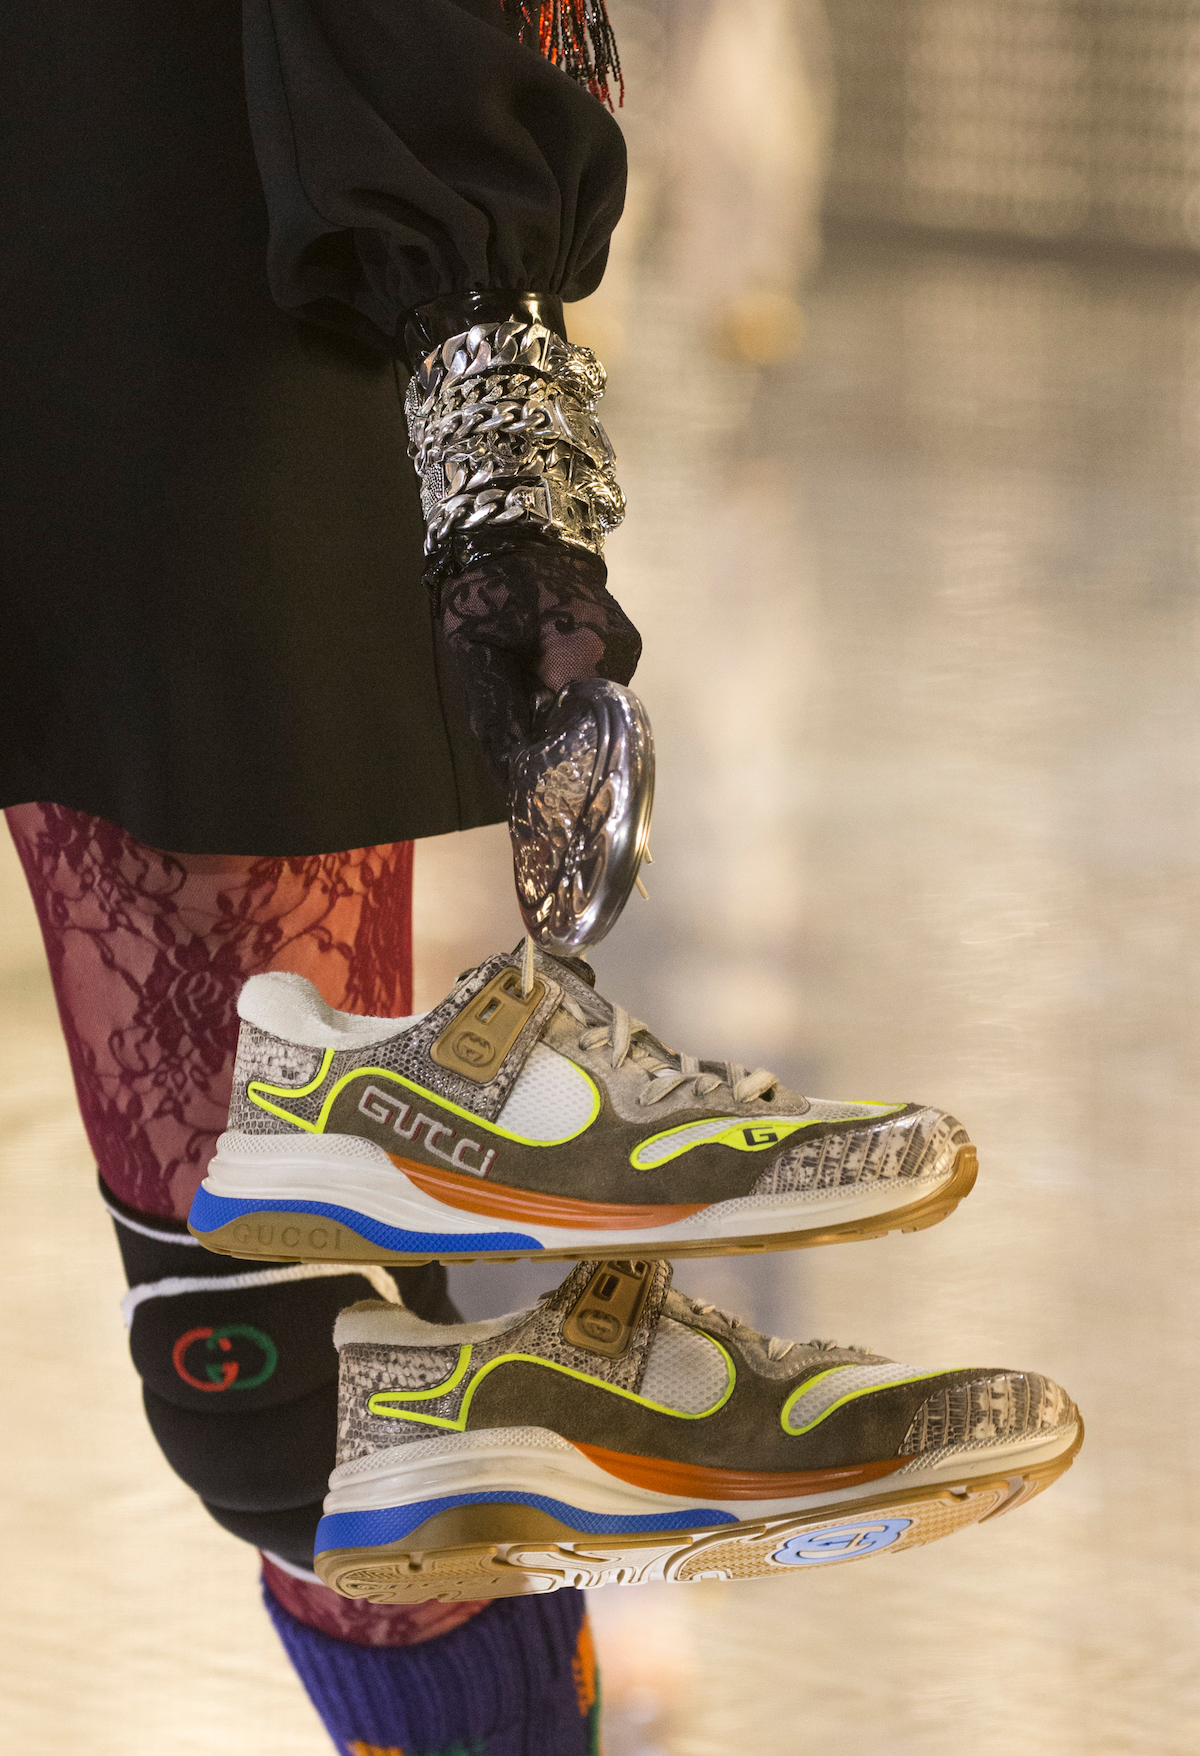 A Closer Look at Gucci’s Autumn/Winter 2019 Collection